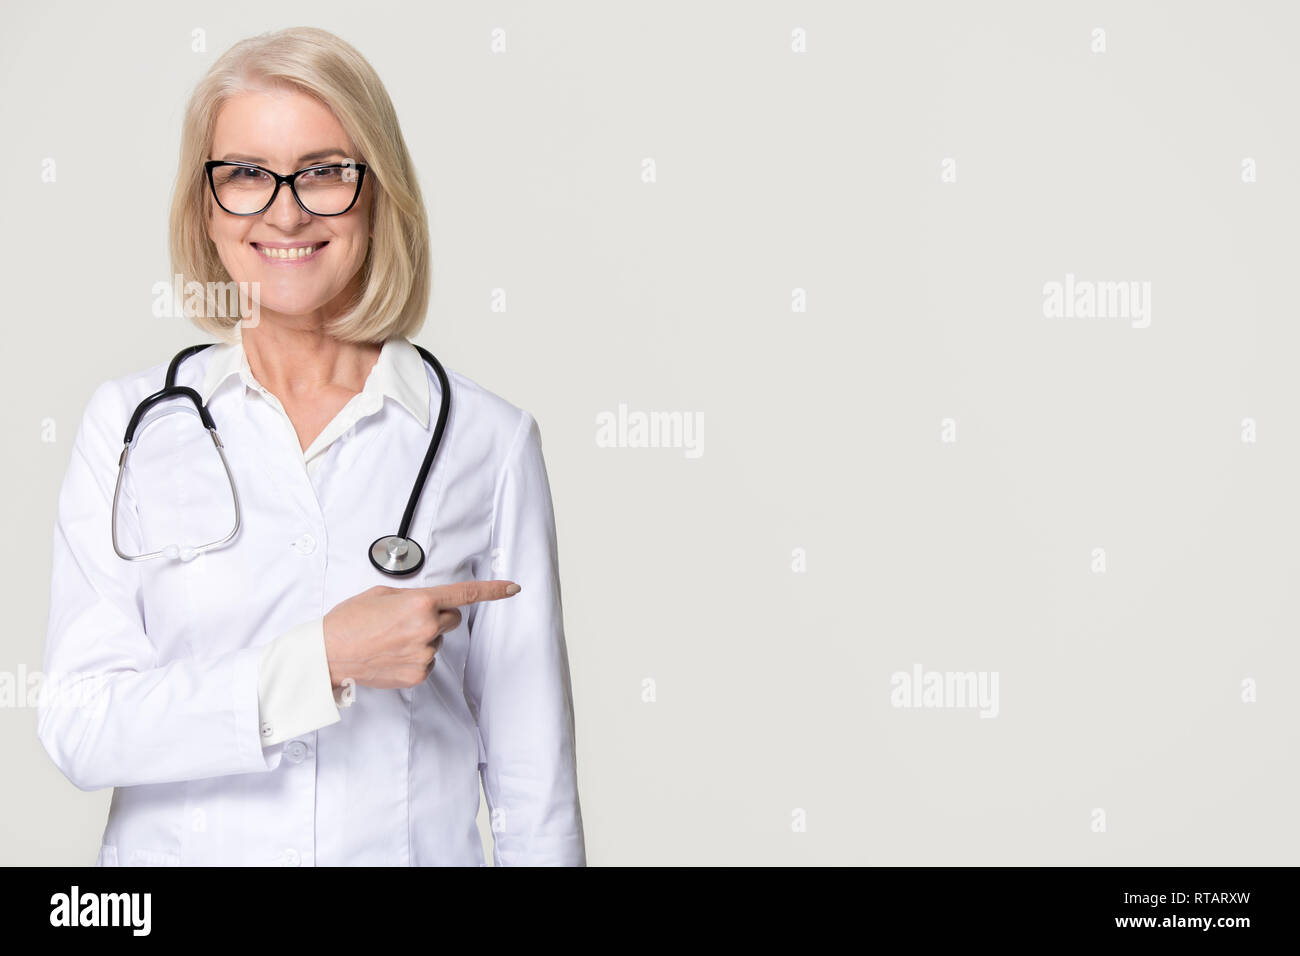 Smiling doctor with stethoscope pointing at copyspace isolated on background Stock Photo